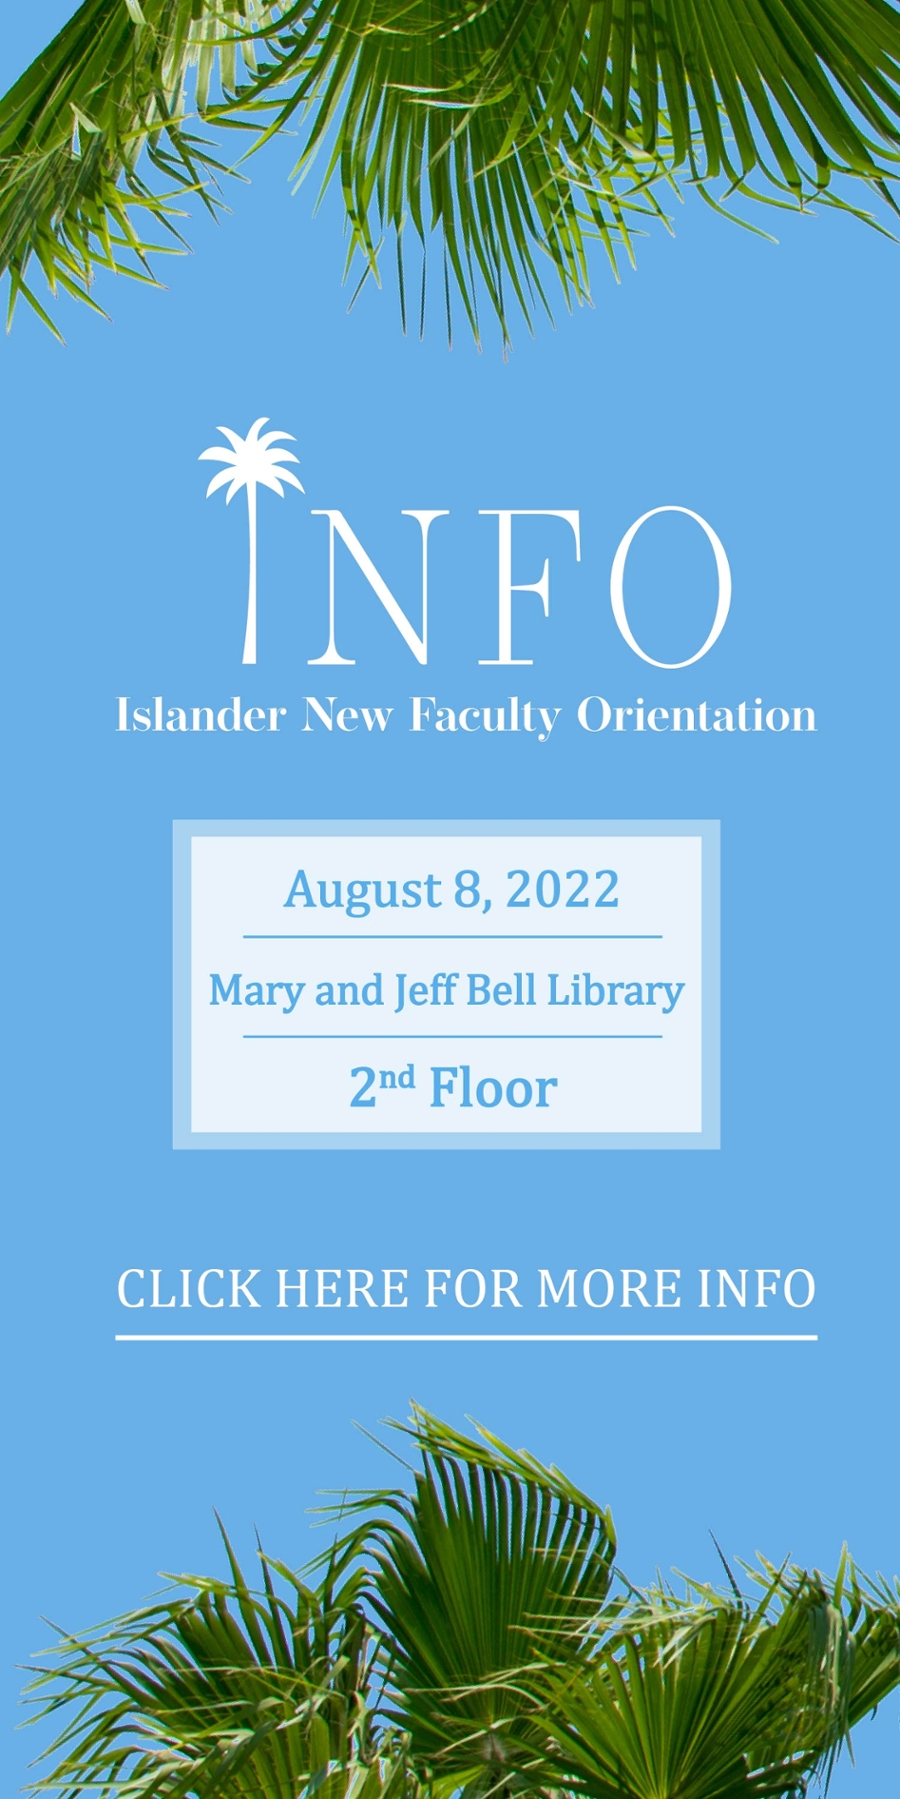 INFO 2022. Islander new Faculty Orientation. August 8th, 2022 at the Mary and Jeff Bell Library on the 2nd Floor. Click here for more info.